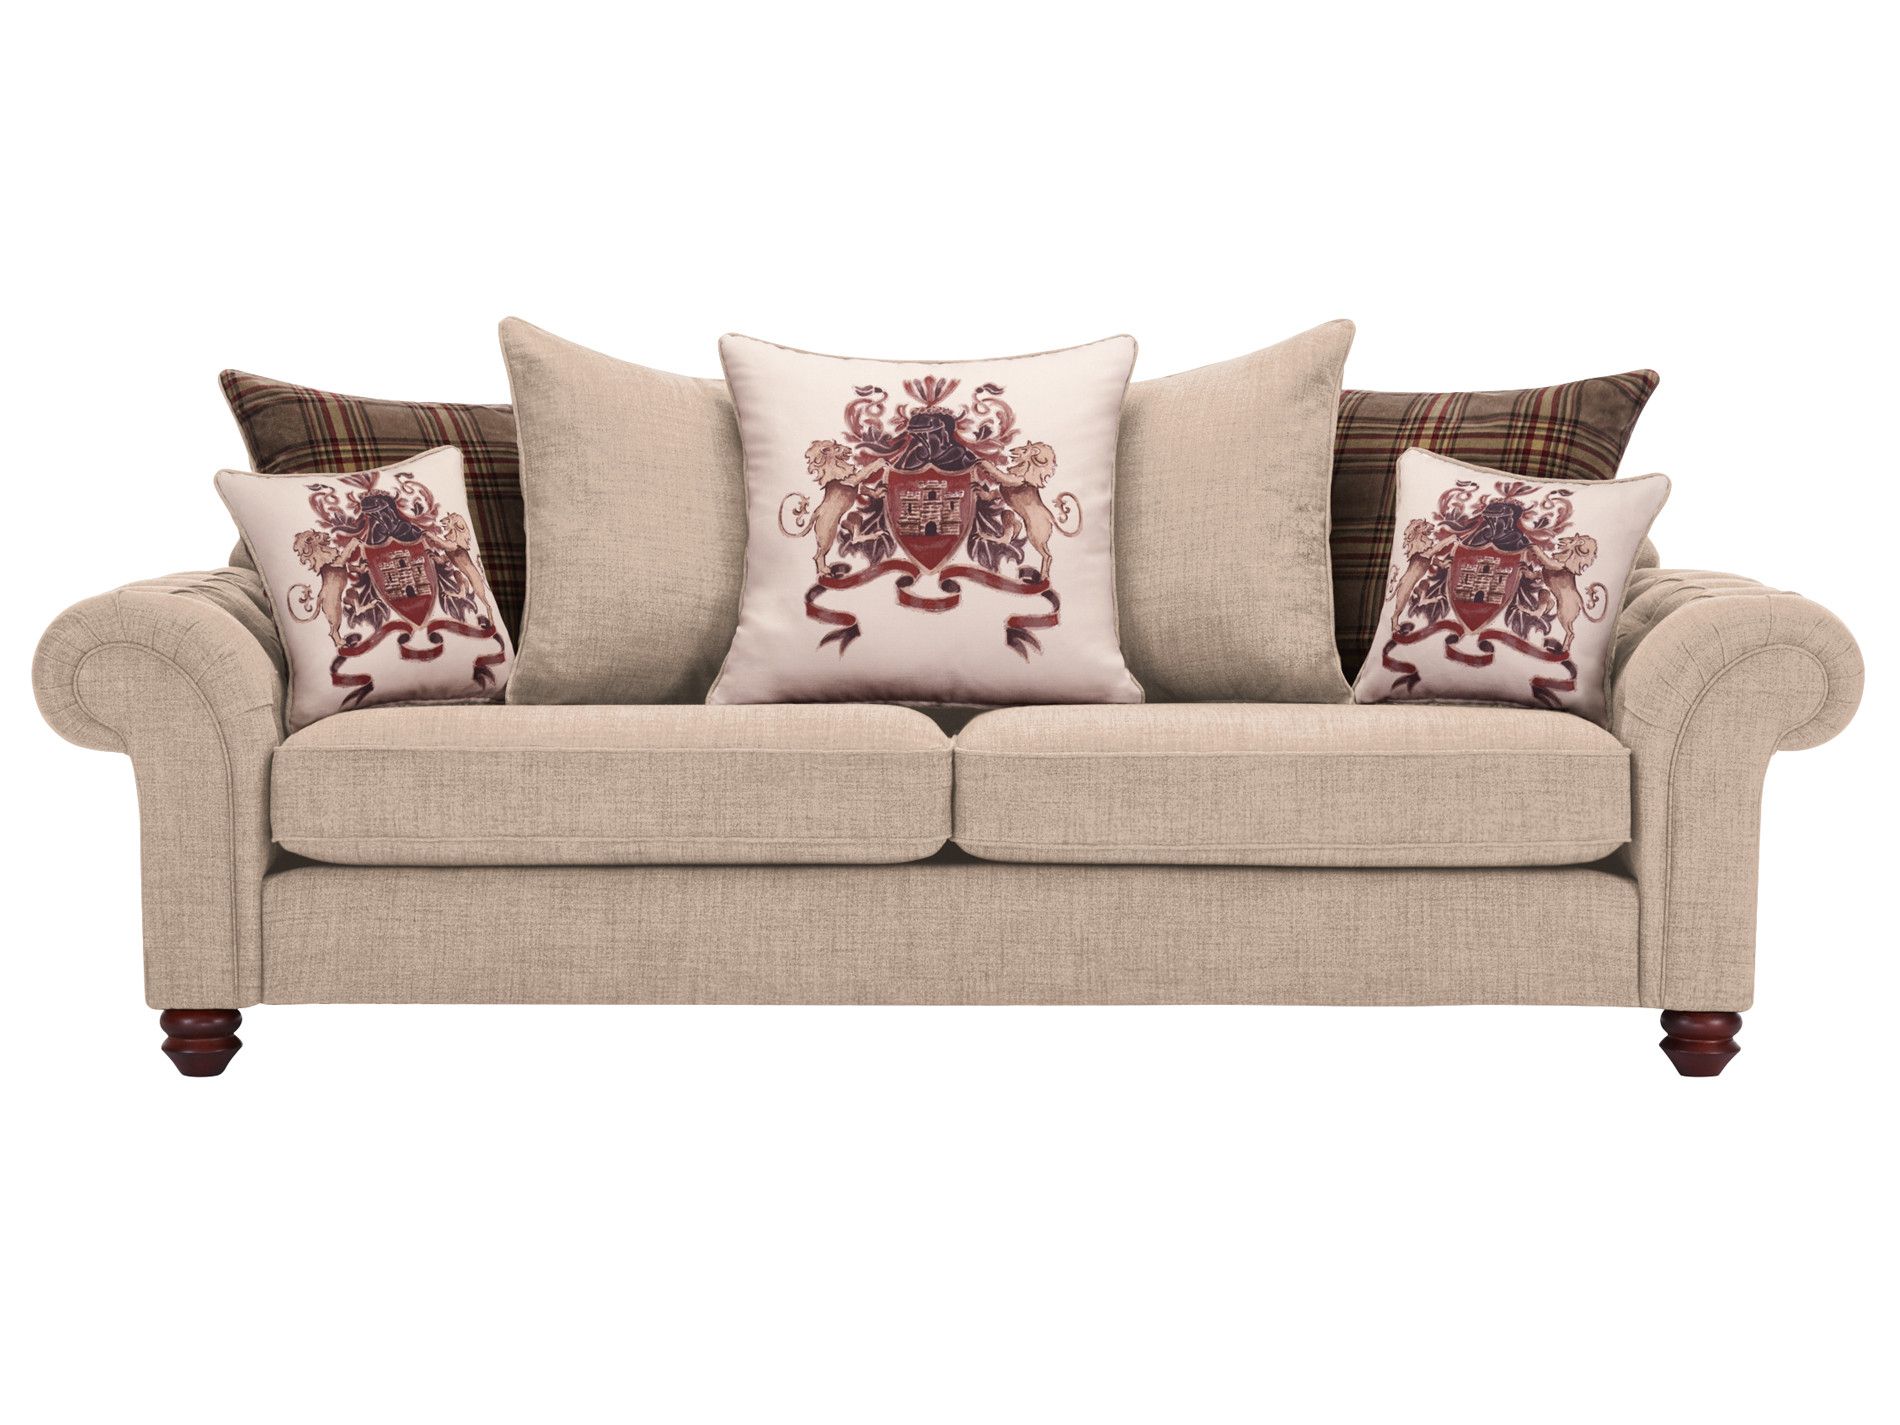 Sandringham 4 Seater Pillow Back Sofa In Beige With Brown For Lyvia Pillowback Sofa Sectional Sofas (View 9 of 15)